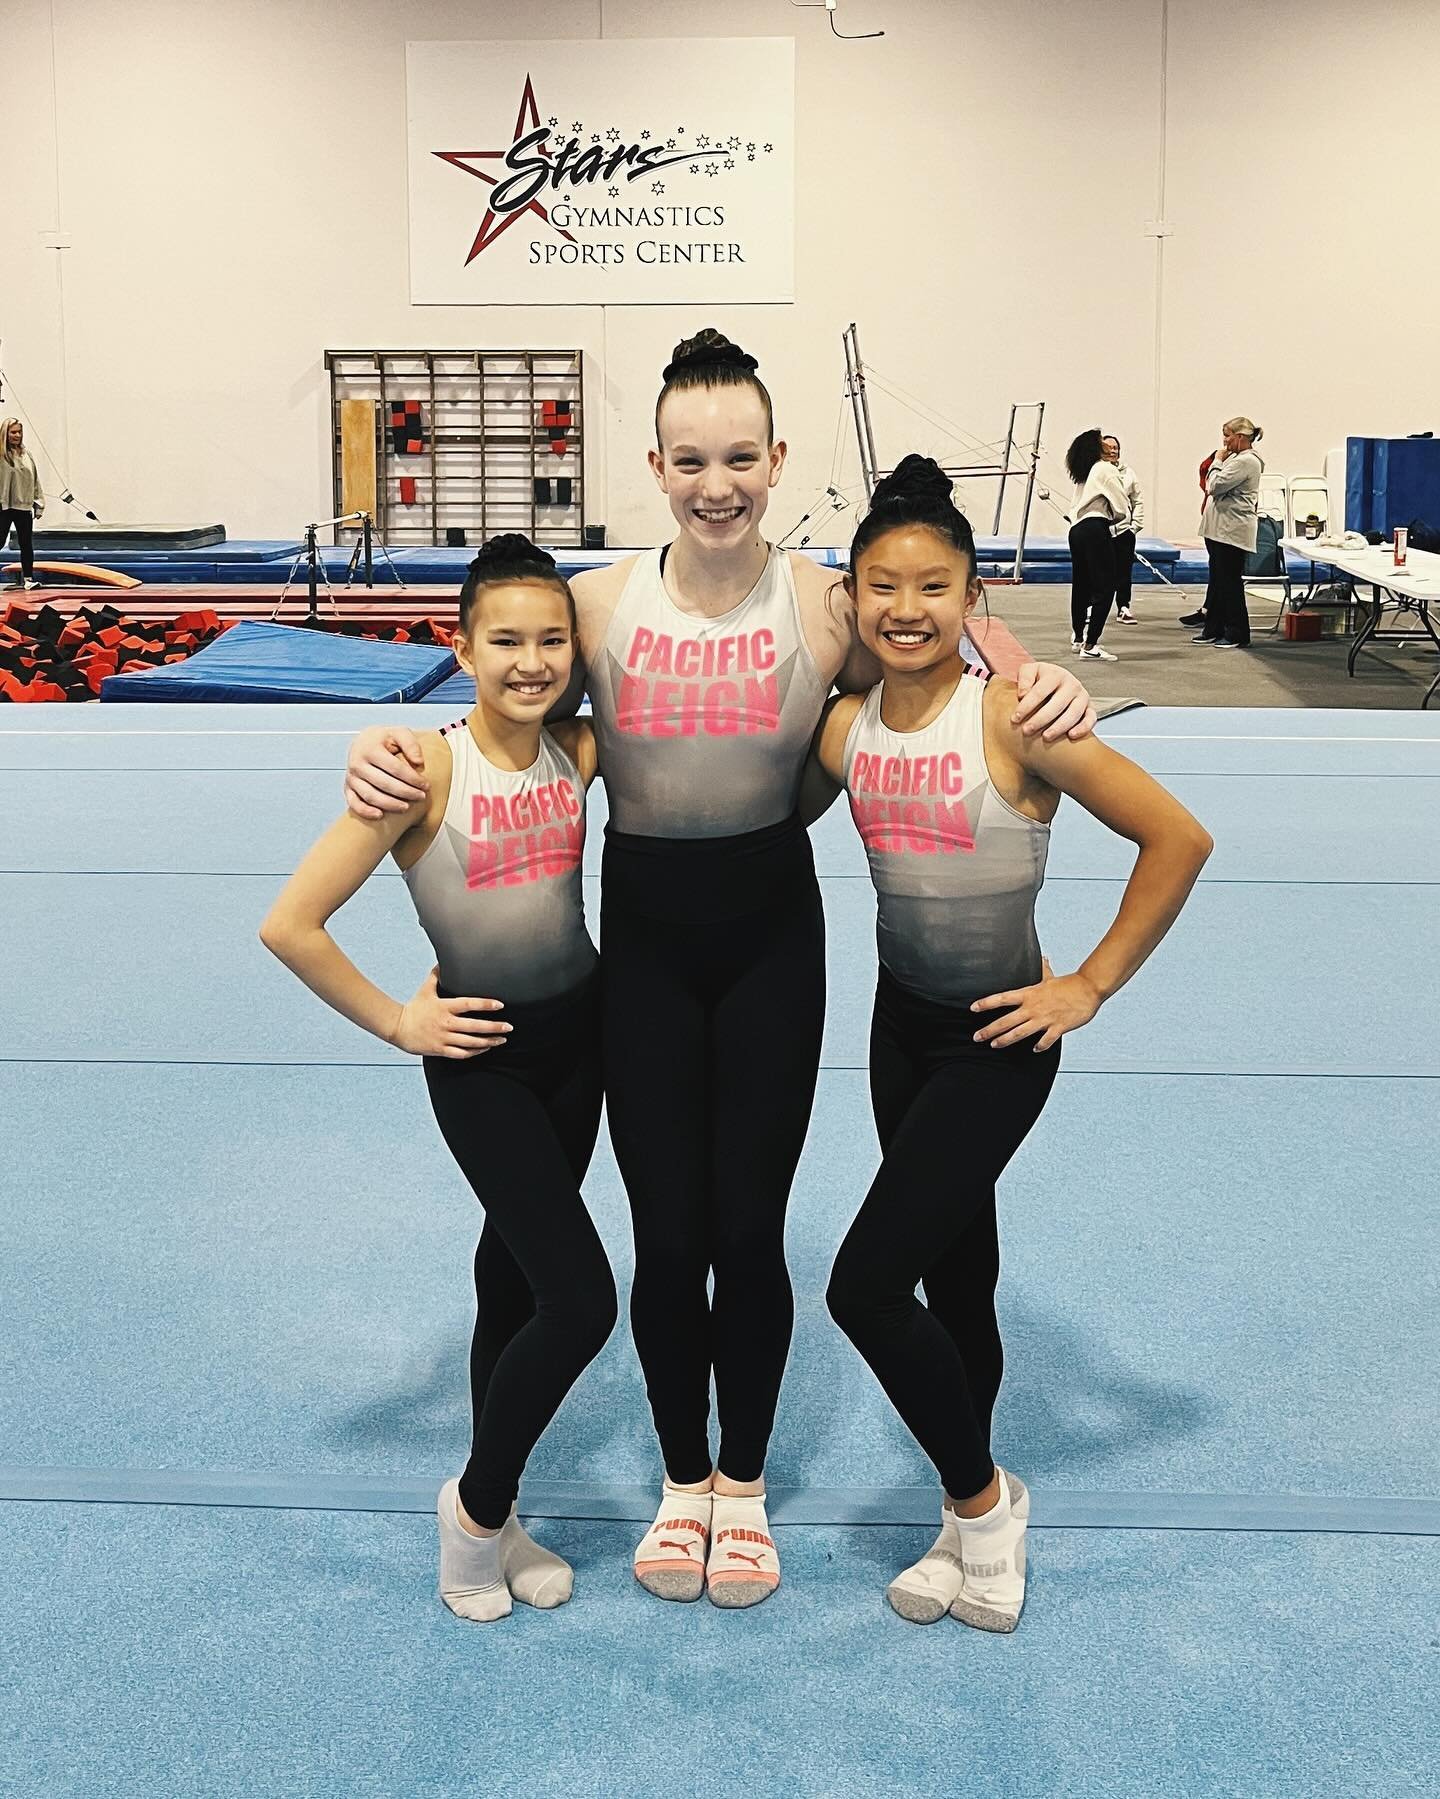 Hopes Classic Training Day ✅

Elisabeth, Espy and Simone take the floor in Katy, TX tomorrow for the Hopes Classic (13-14) competition! Excited to watch them shine out there! 

#Train2Reign👑 | @usagym | #hopesclassic